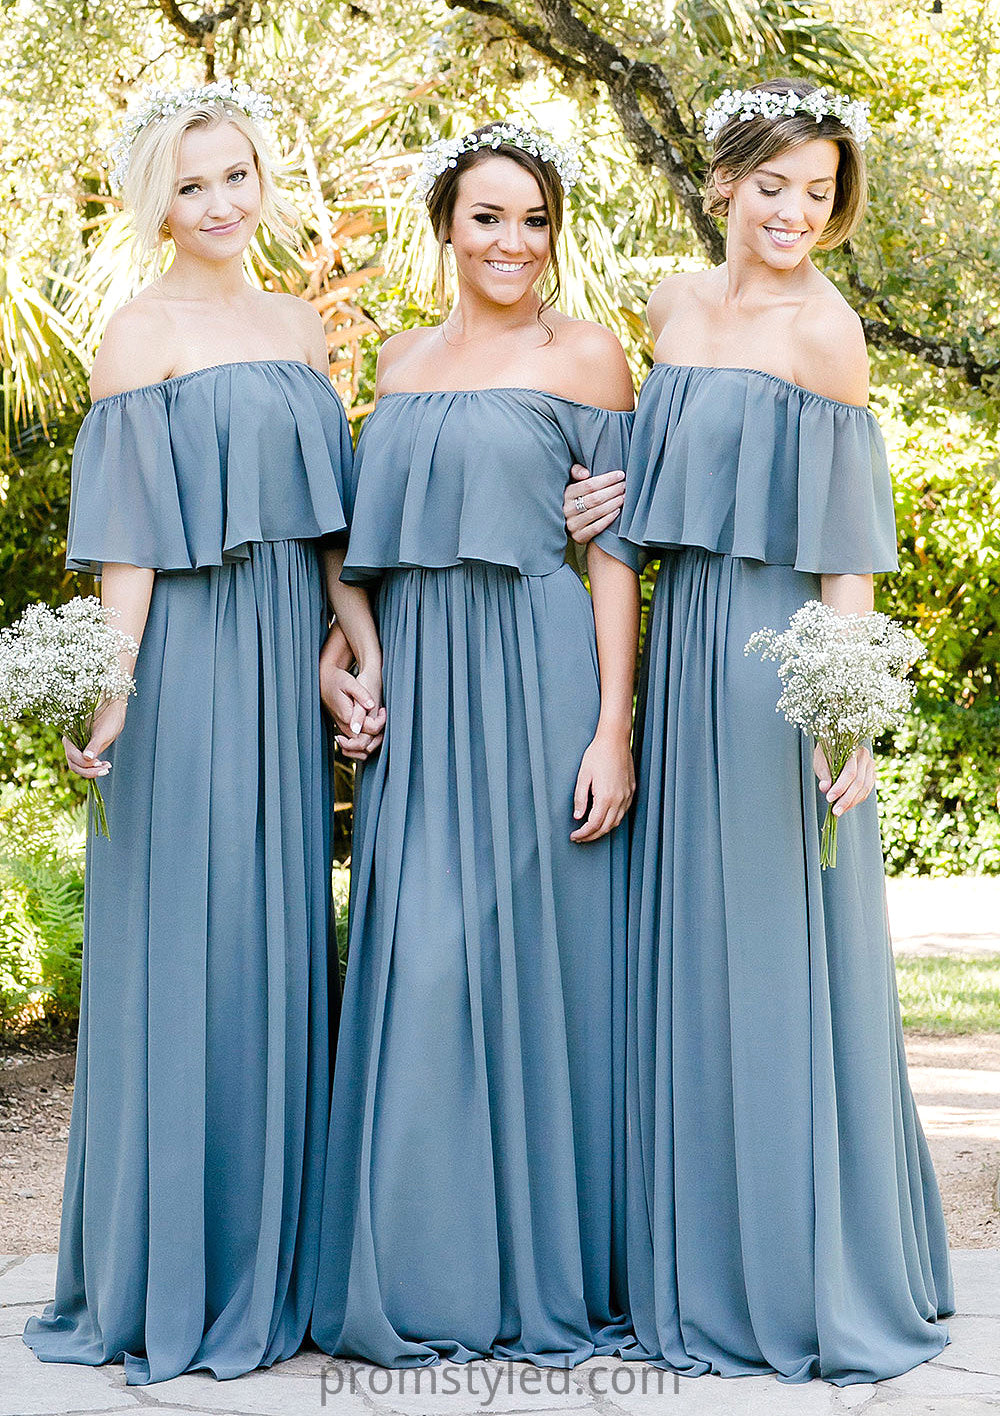 Off-The-Shoulder A-Line/Princess Long/Floor-Length Chiffon Bridesmaid Dresses With Ruffles Brynlee HLP0025555